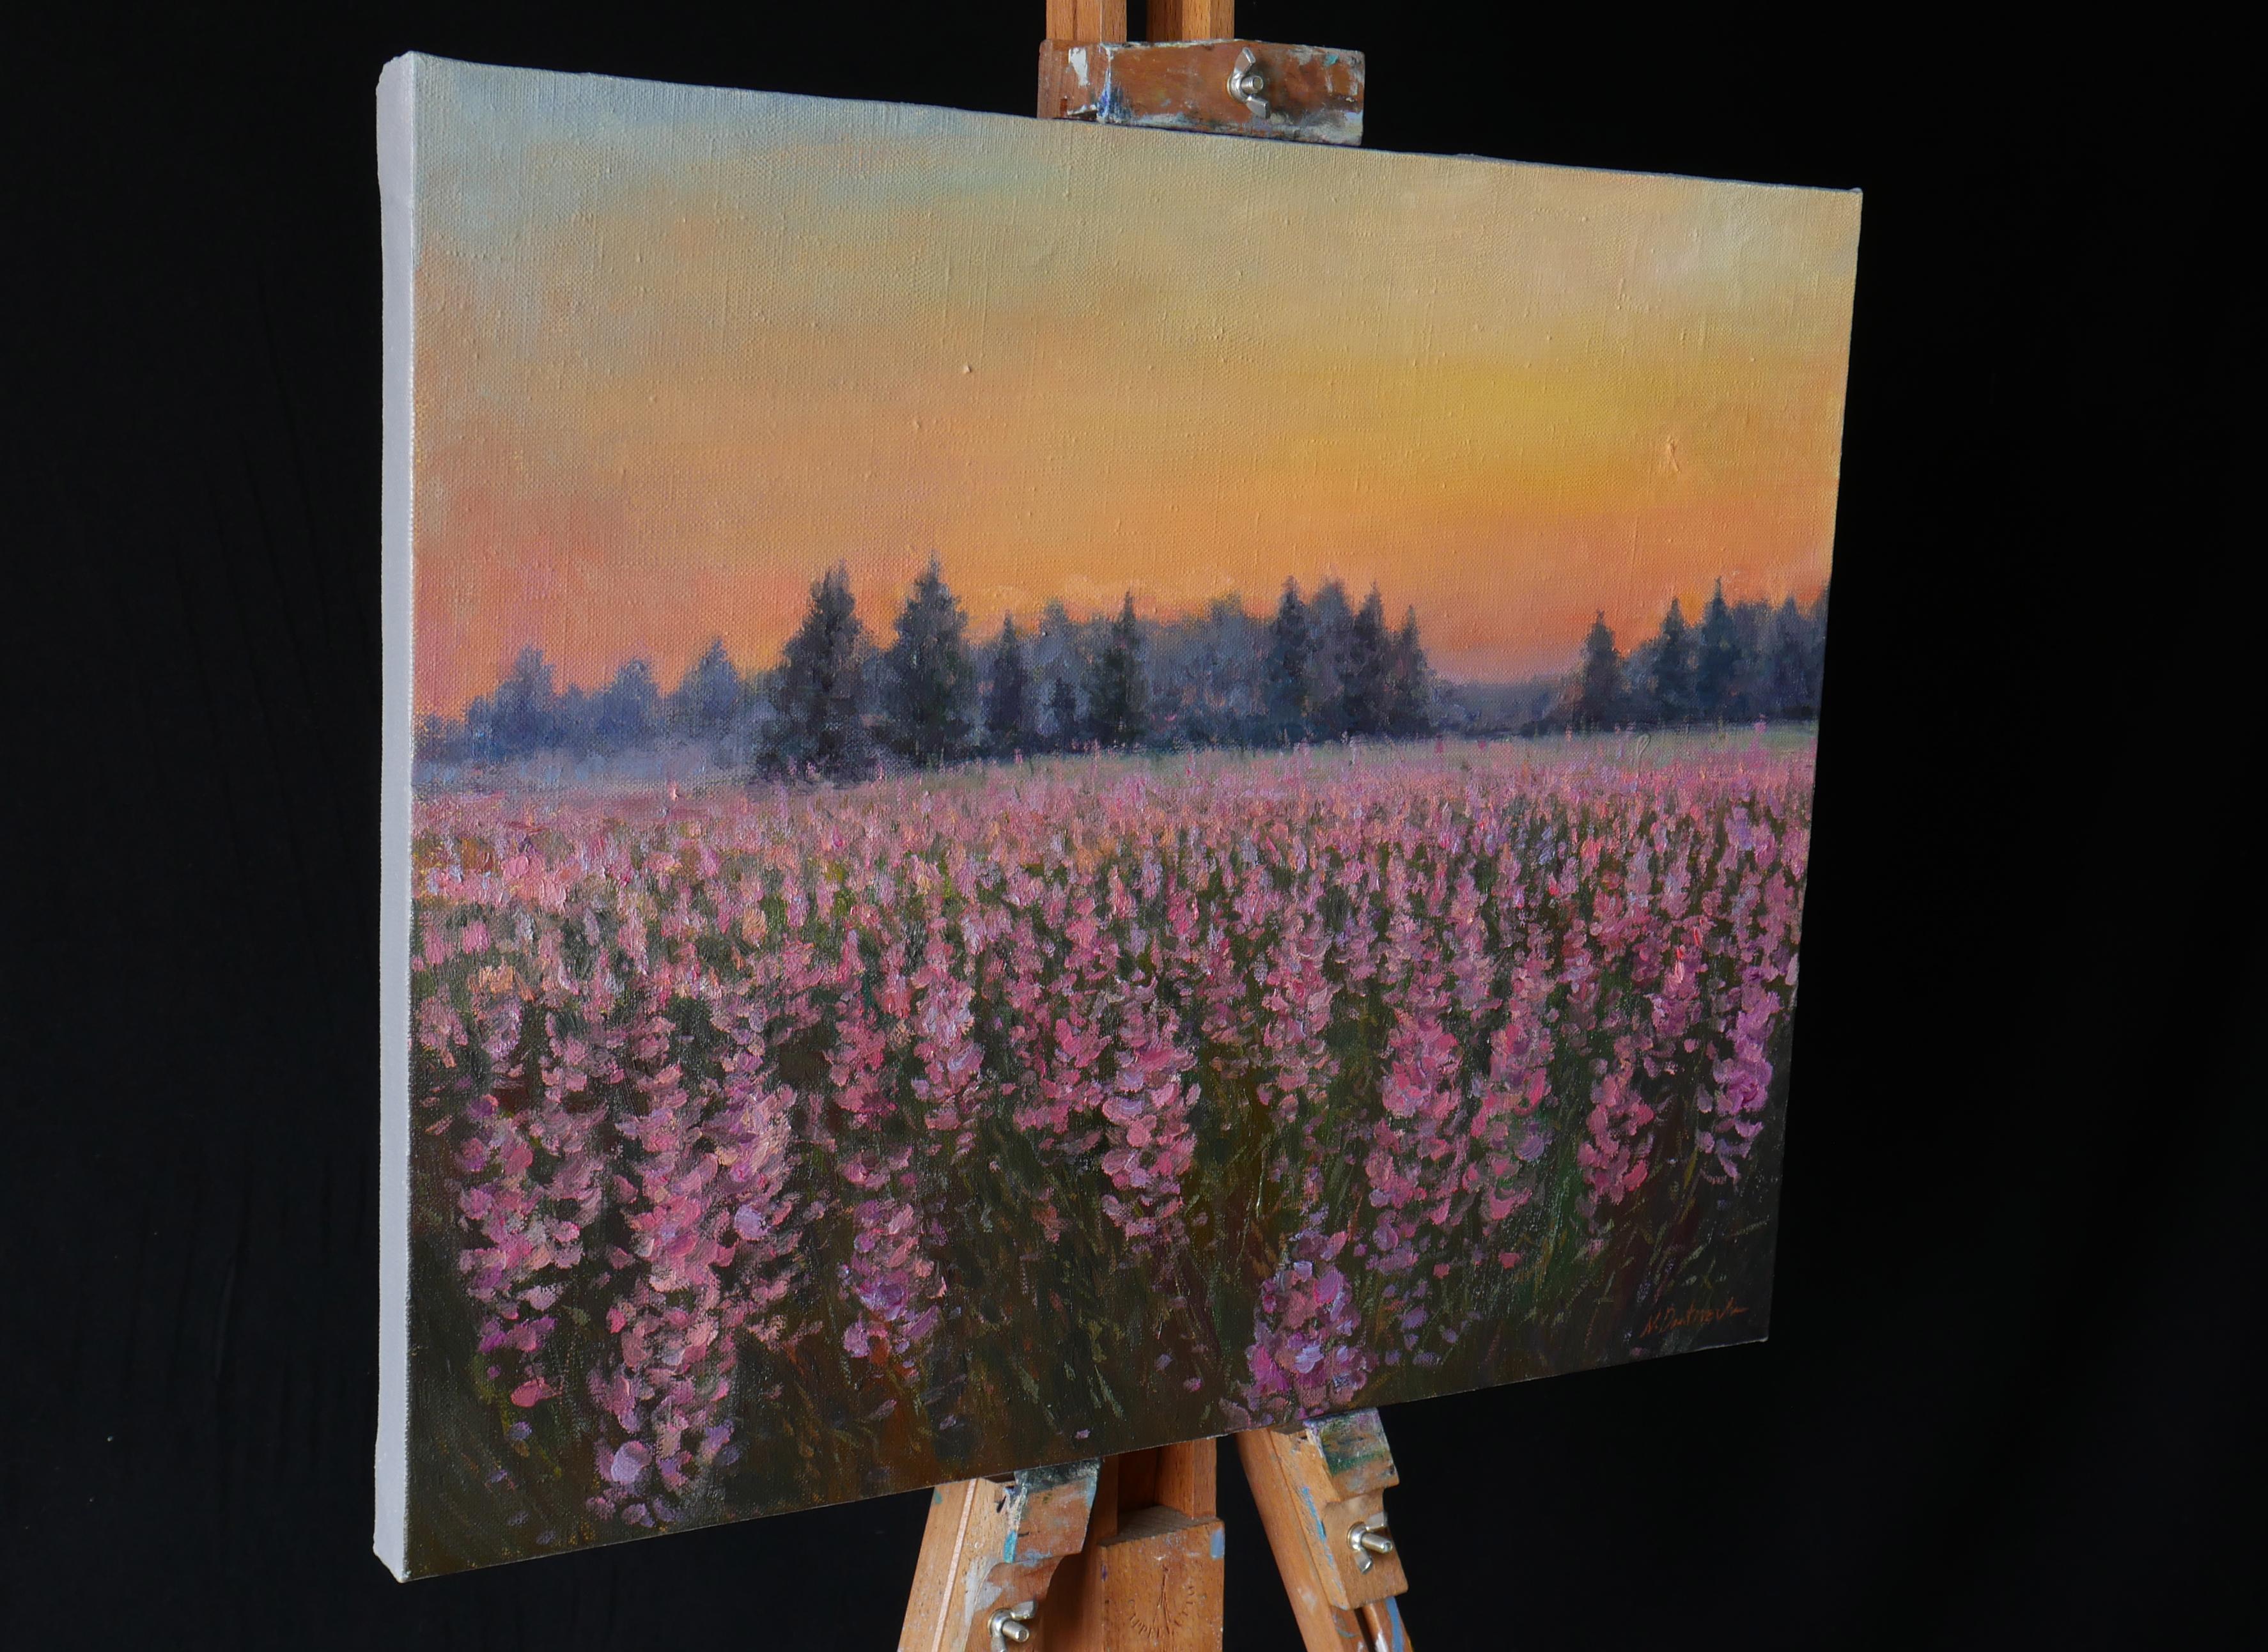 Sunset Above The Fireweed Field - original summer landscape painting - Painting by Nikolay Dmitriev